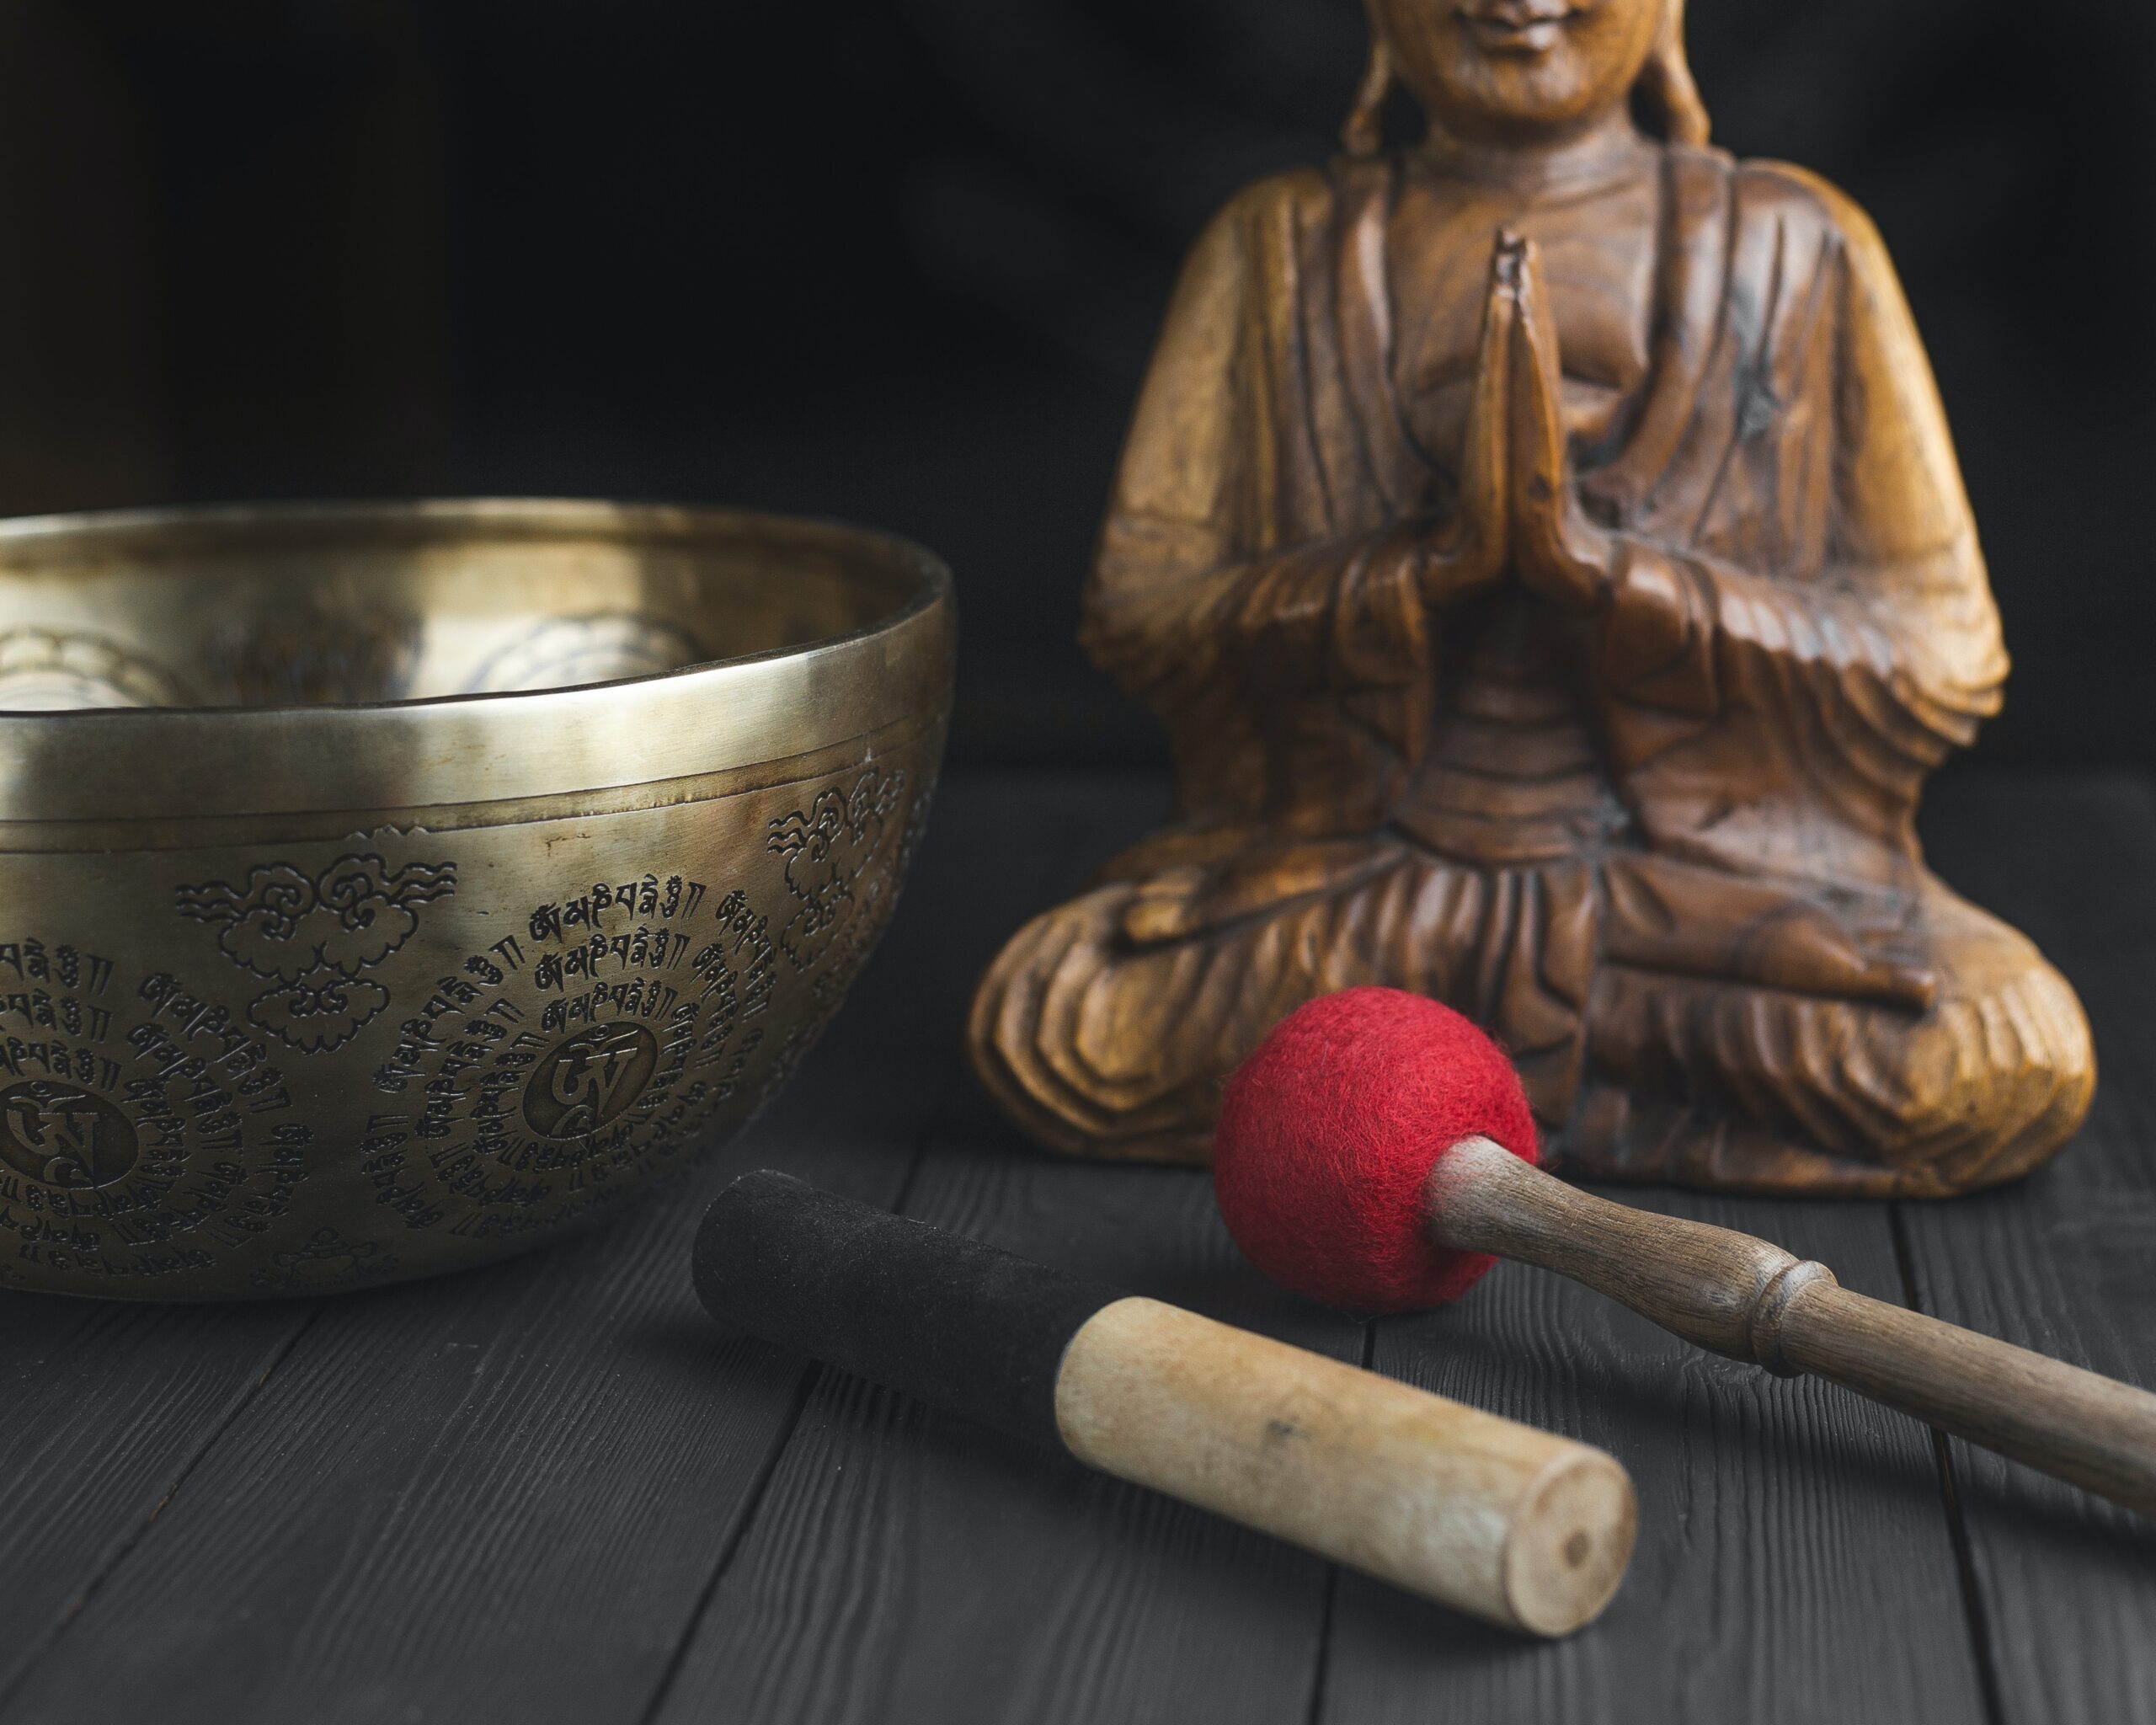 Anecdotes and studies have reported instances where individuals experienced a broad spectrum of effects beyond the intended outcomes - the sound healing side effects.